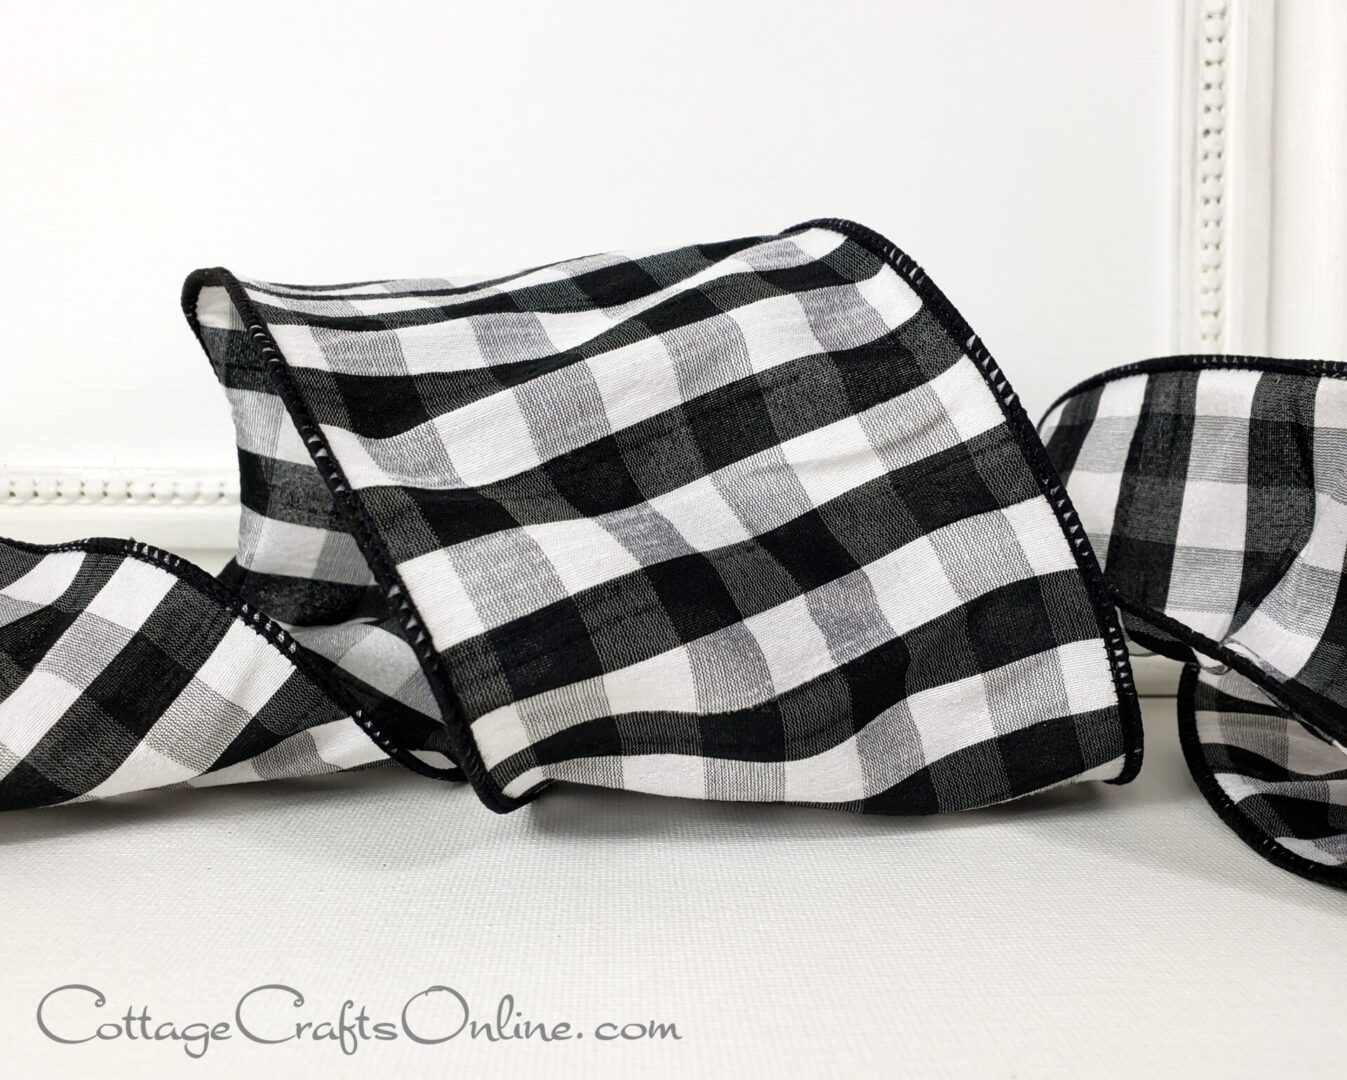 A black and white plaid ribbon sitting on top of a table.